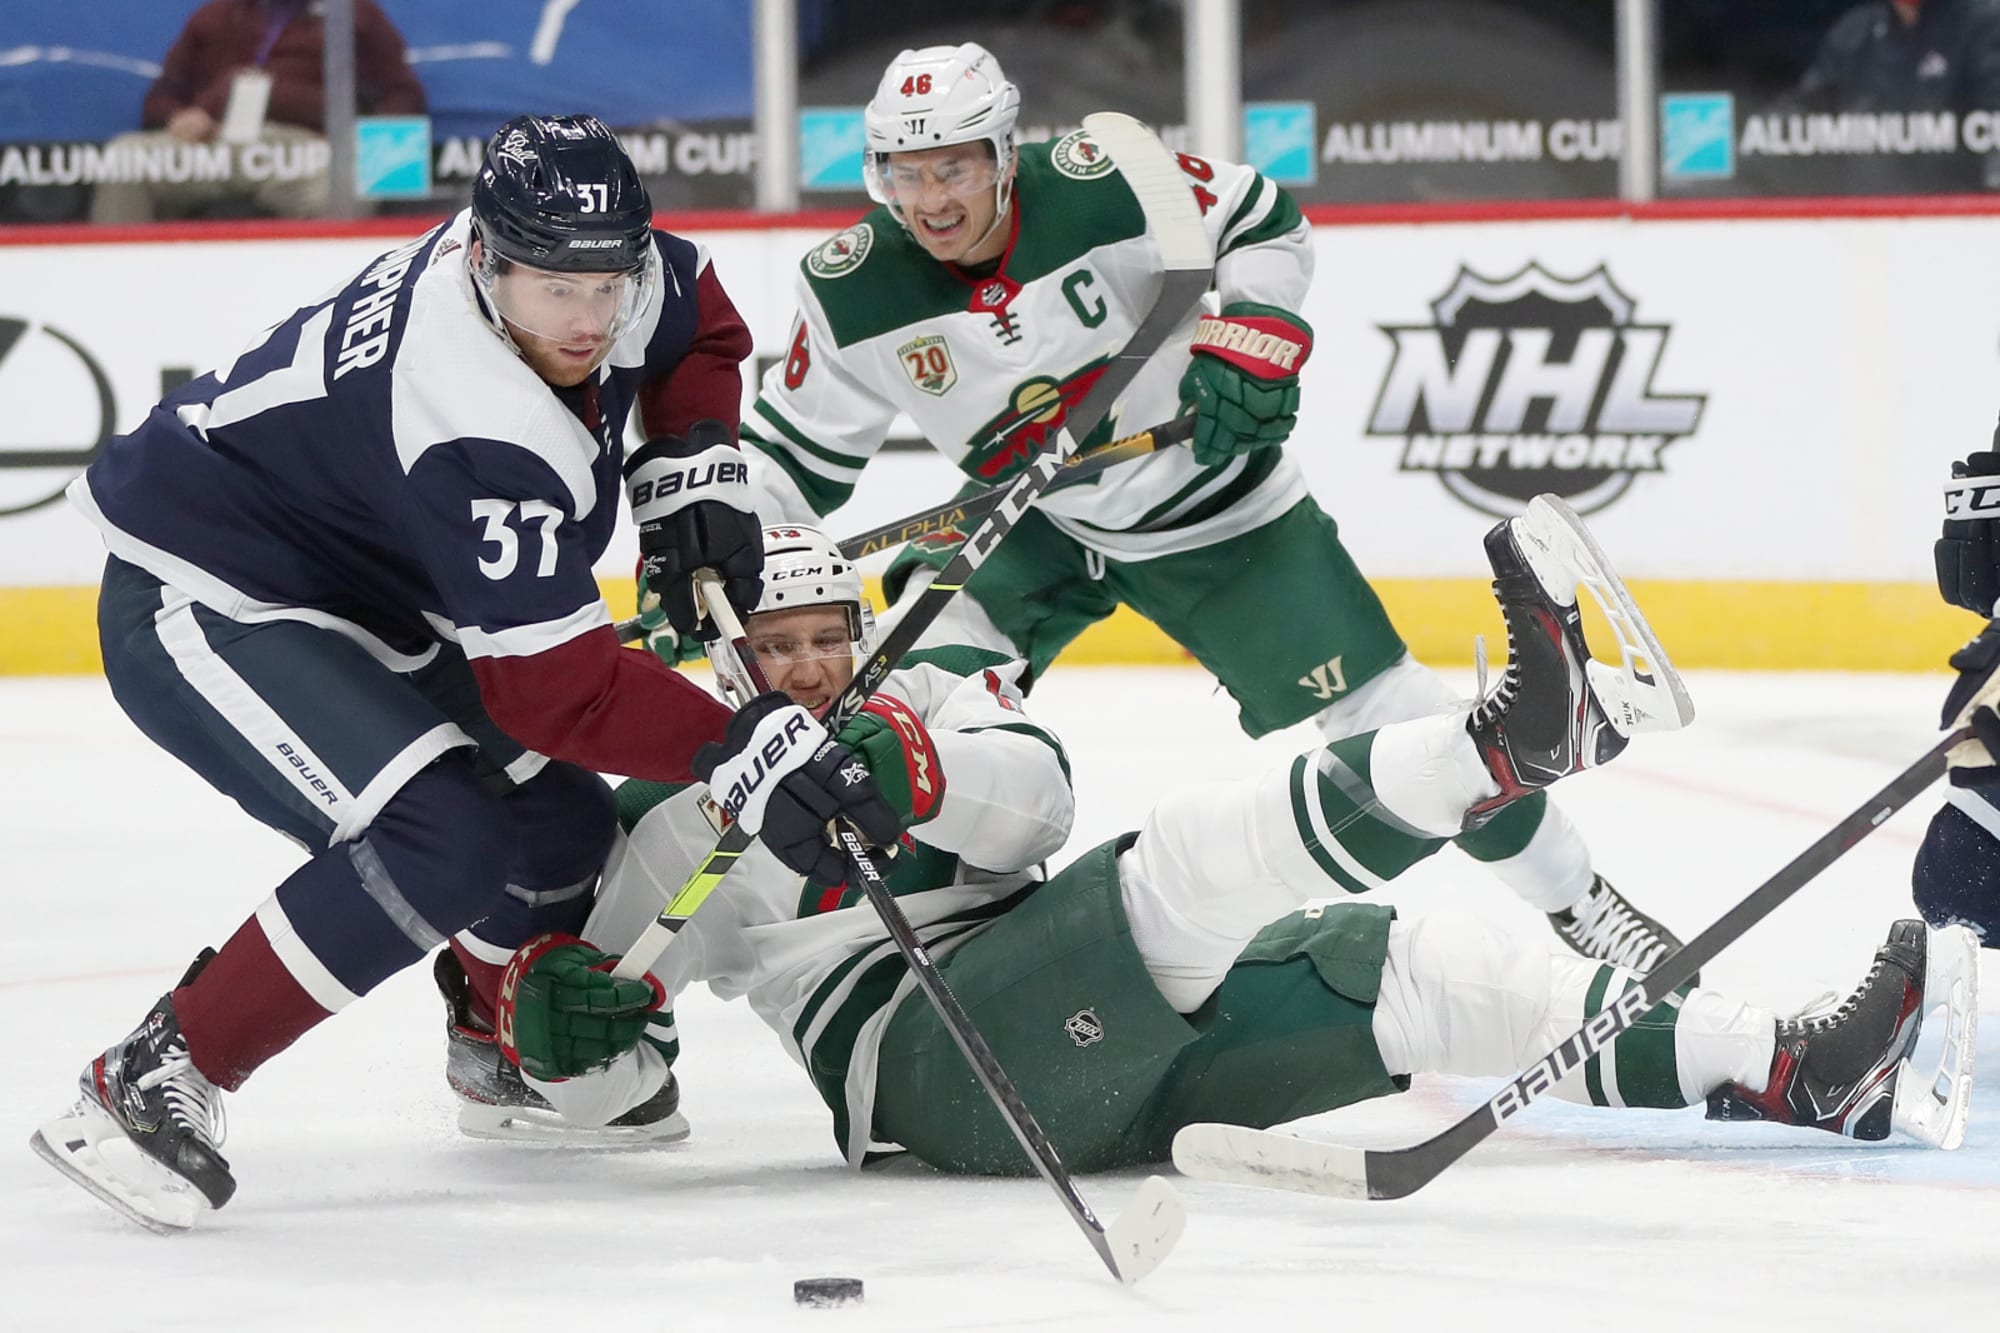 Minnesota Wild forward Kevin Fiala gets three-game suspension for